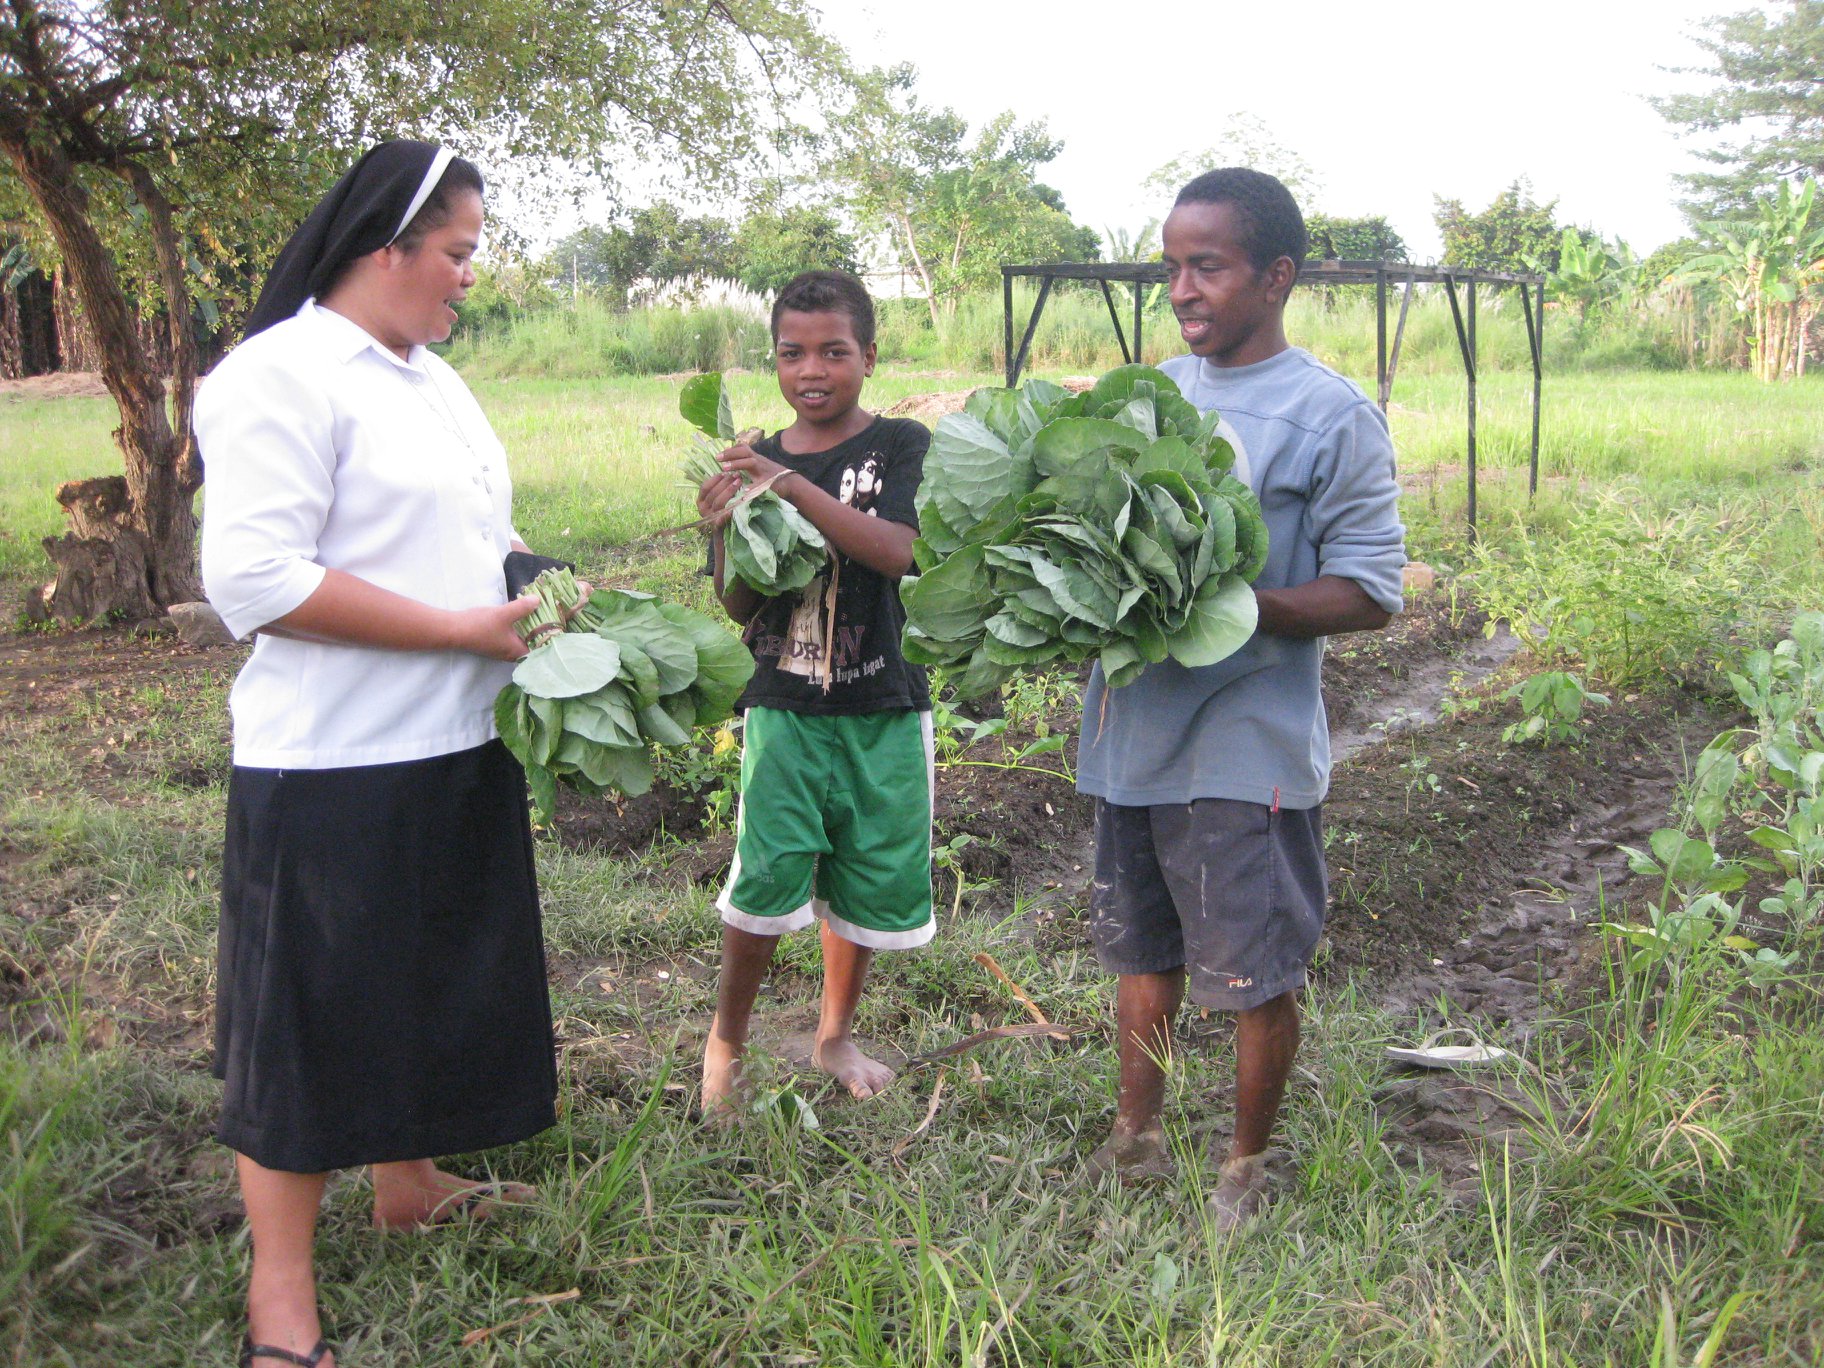 Sr. María Valentina Rebollos Paragas is pictured in the vegetable garden she and her fellow sisters established in 2006 to provide food for the children of the improvised orphanage in the mountains of Natarbora, near Bidau, East Timor. (Courtesy of Sr. María Valentina Rebollos Paragas)